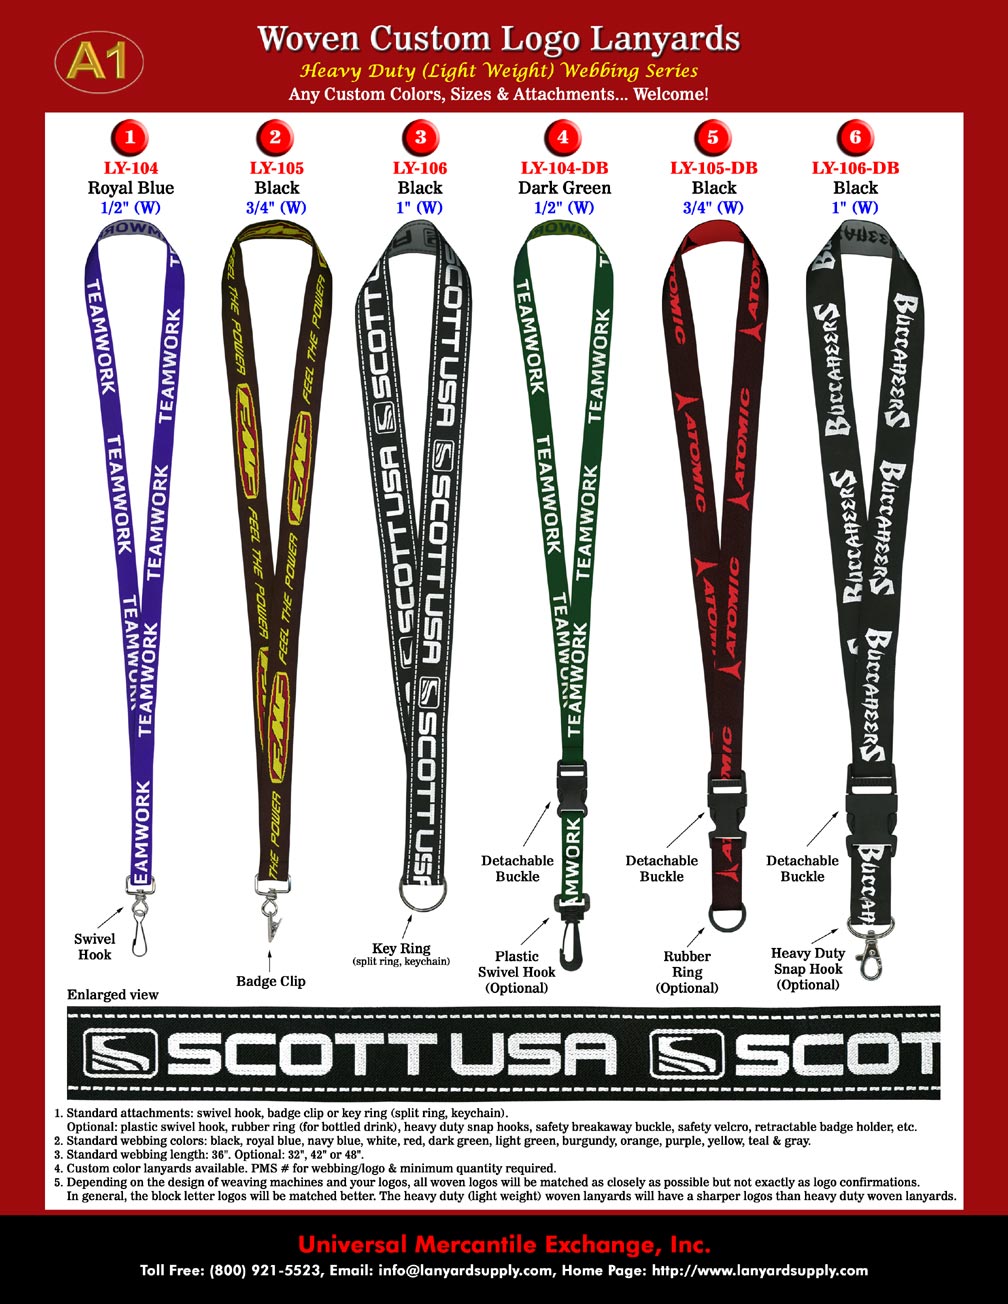 Heavy Duty & Light Weight Woven Lanyards - Custom Woven Neck Lanyards with Weaved-In Logos